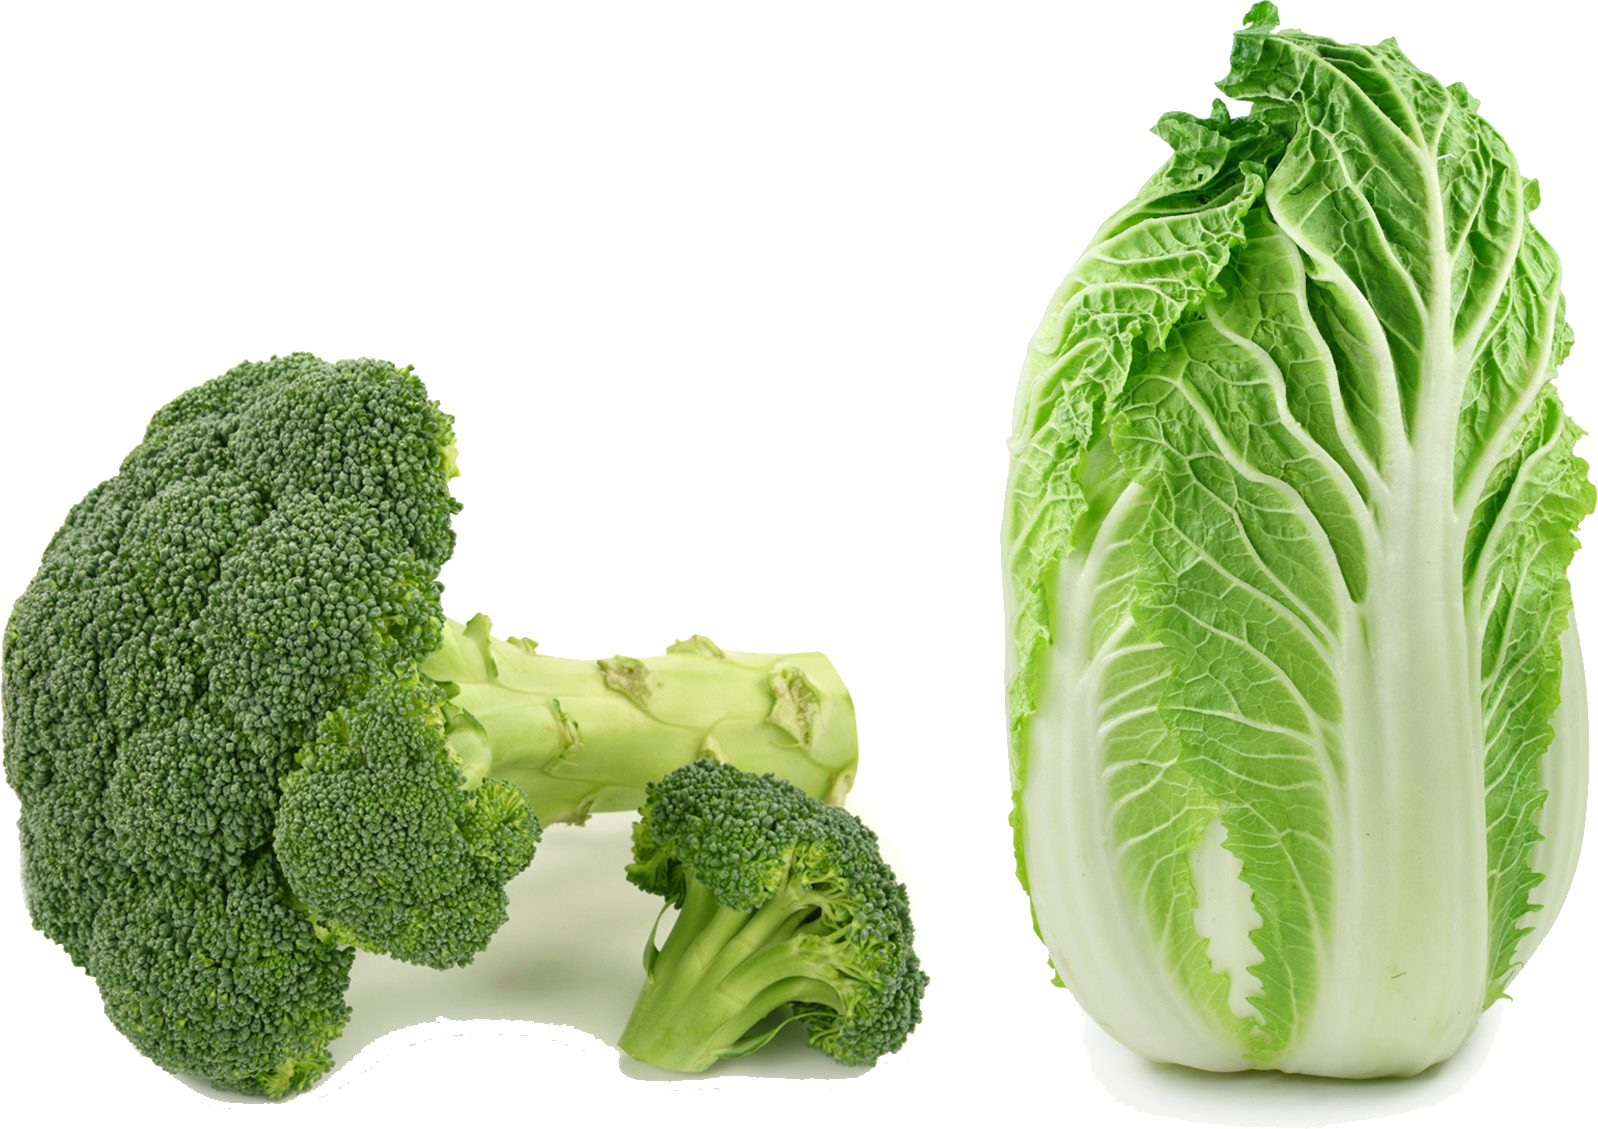 A Head Of Cabbage And Broccoli